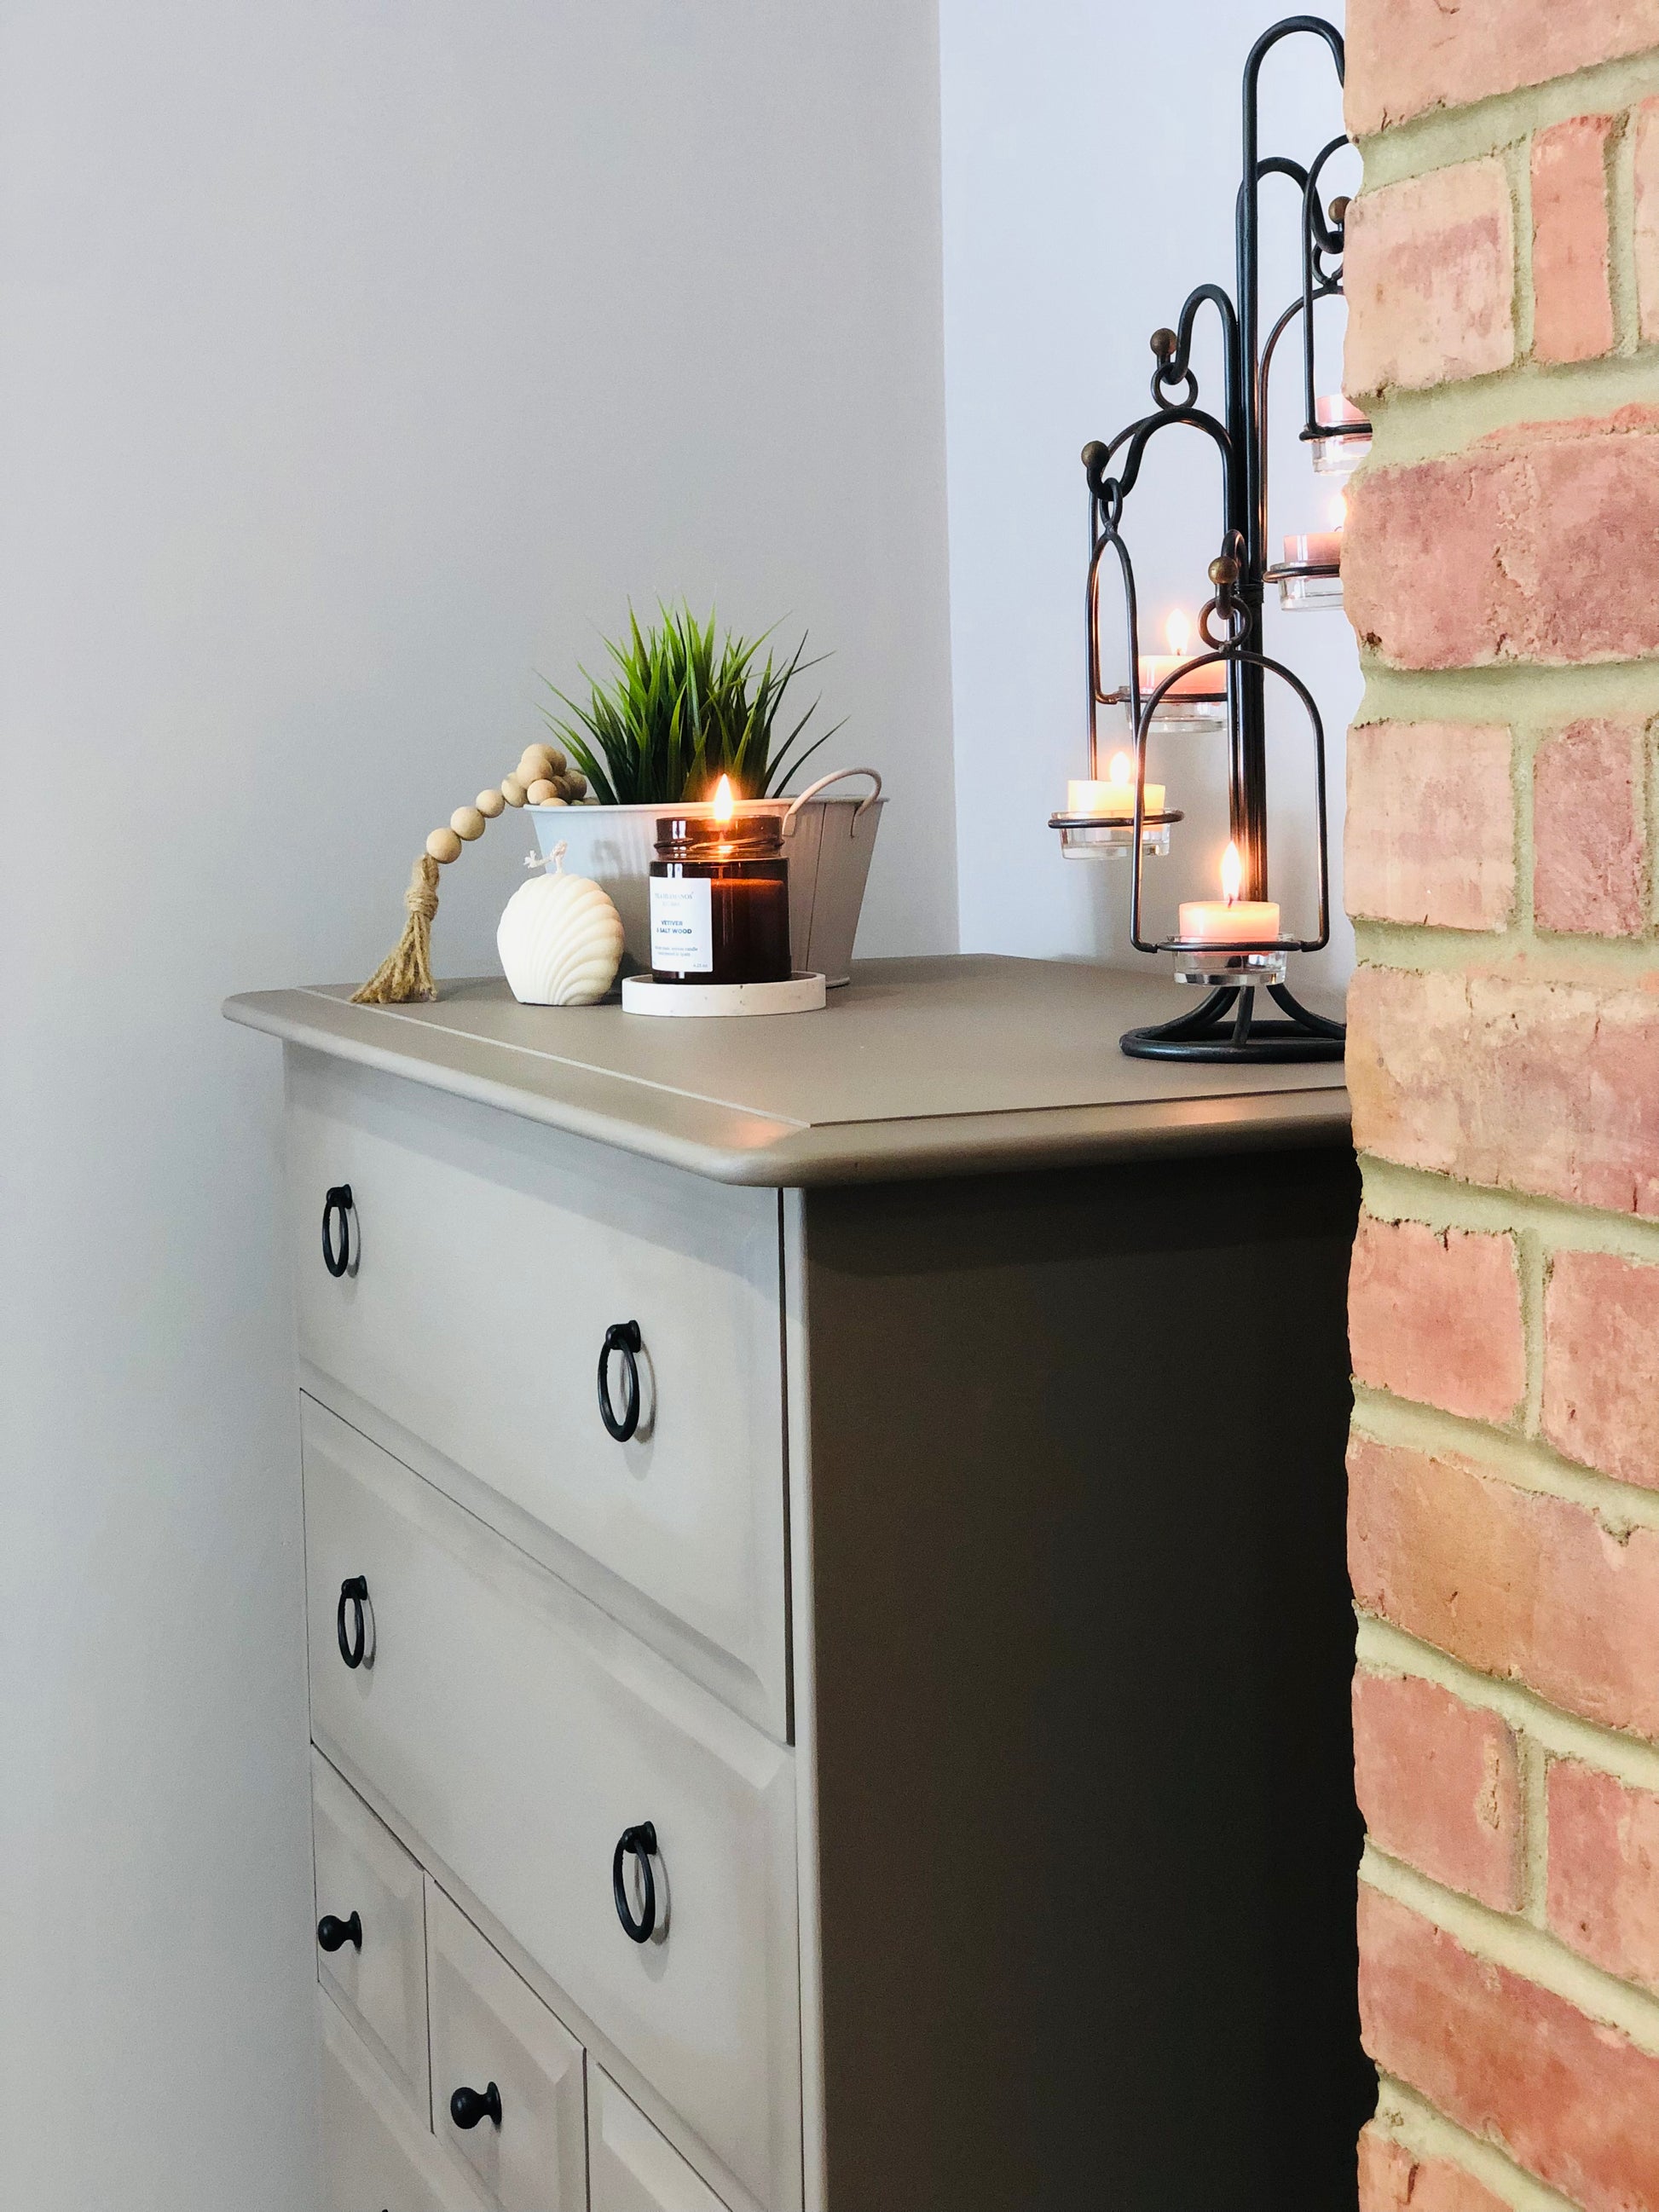 Stag Minstrel painted tallboy with 7 drawers, painted in a neutral shade, with matte black handles